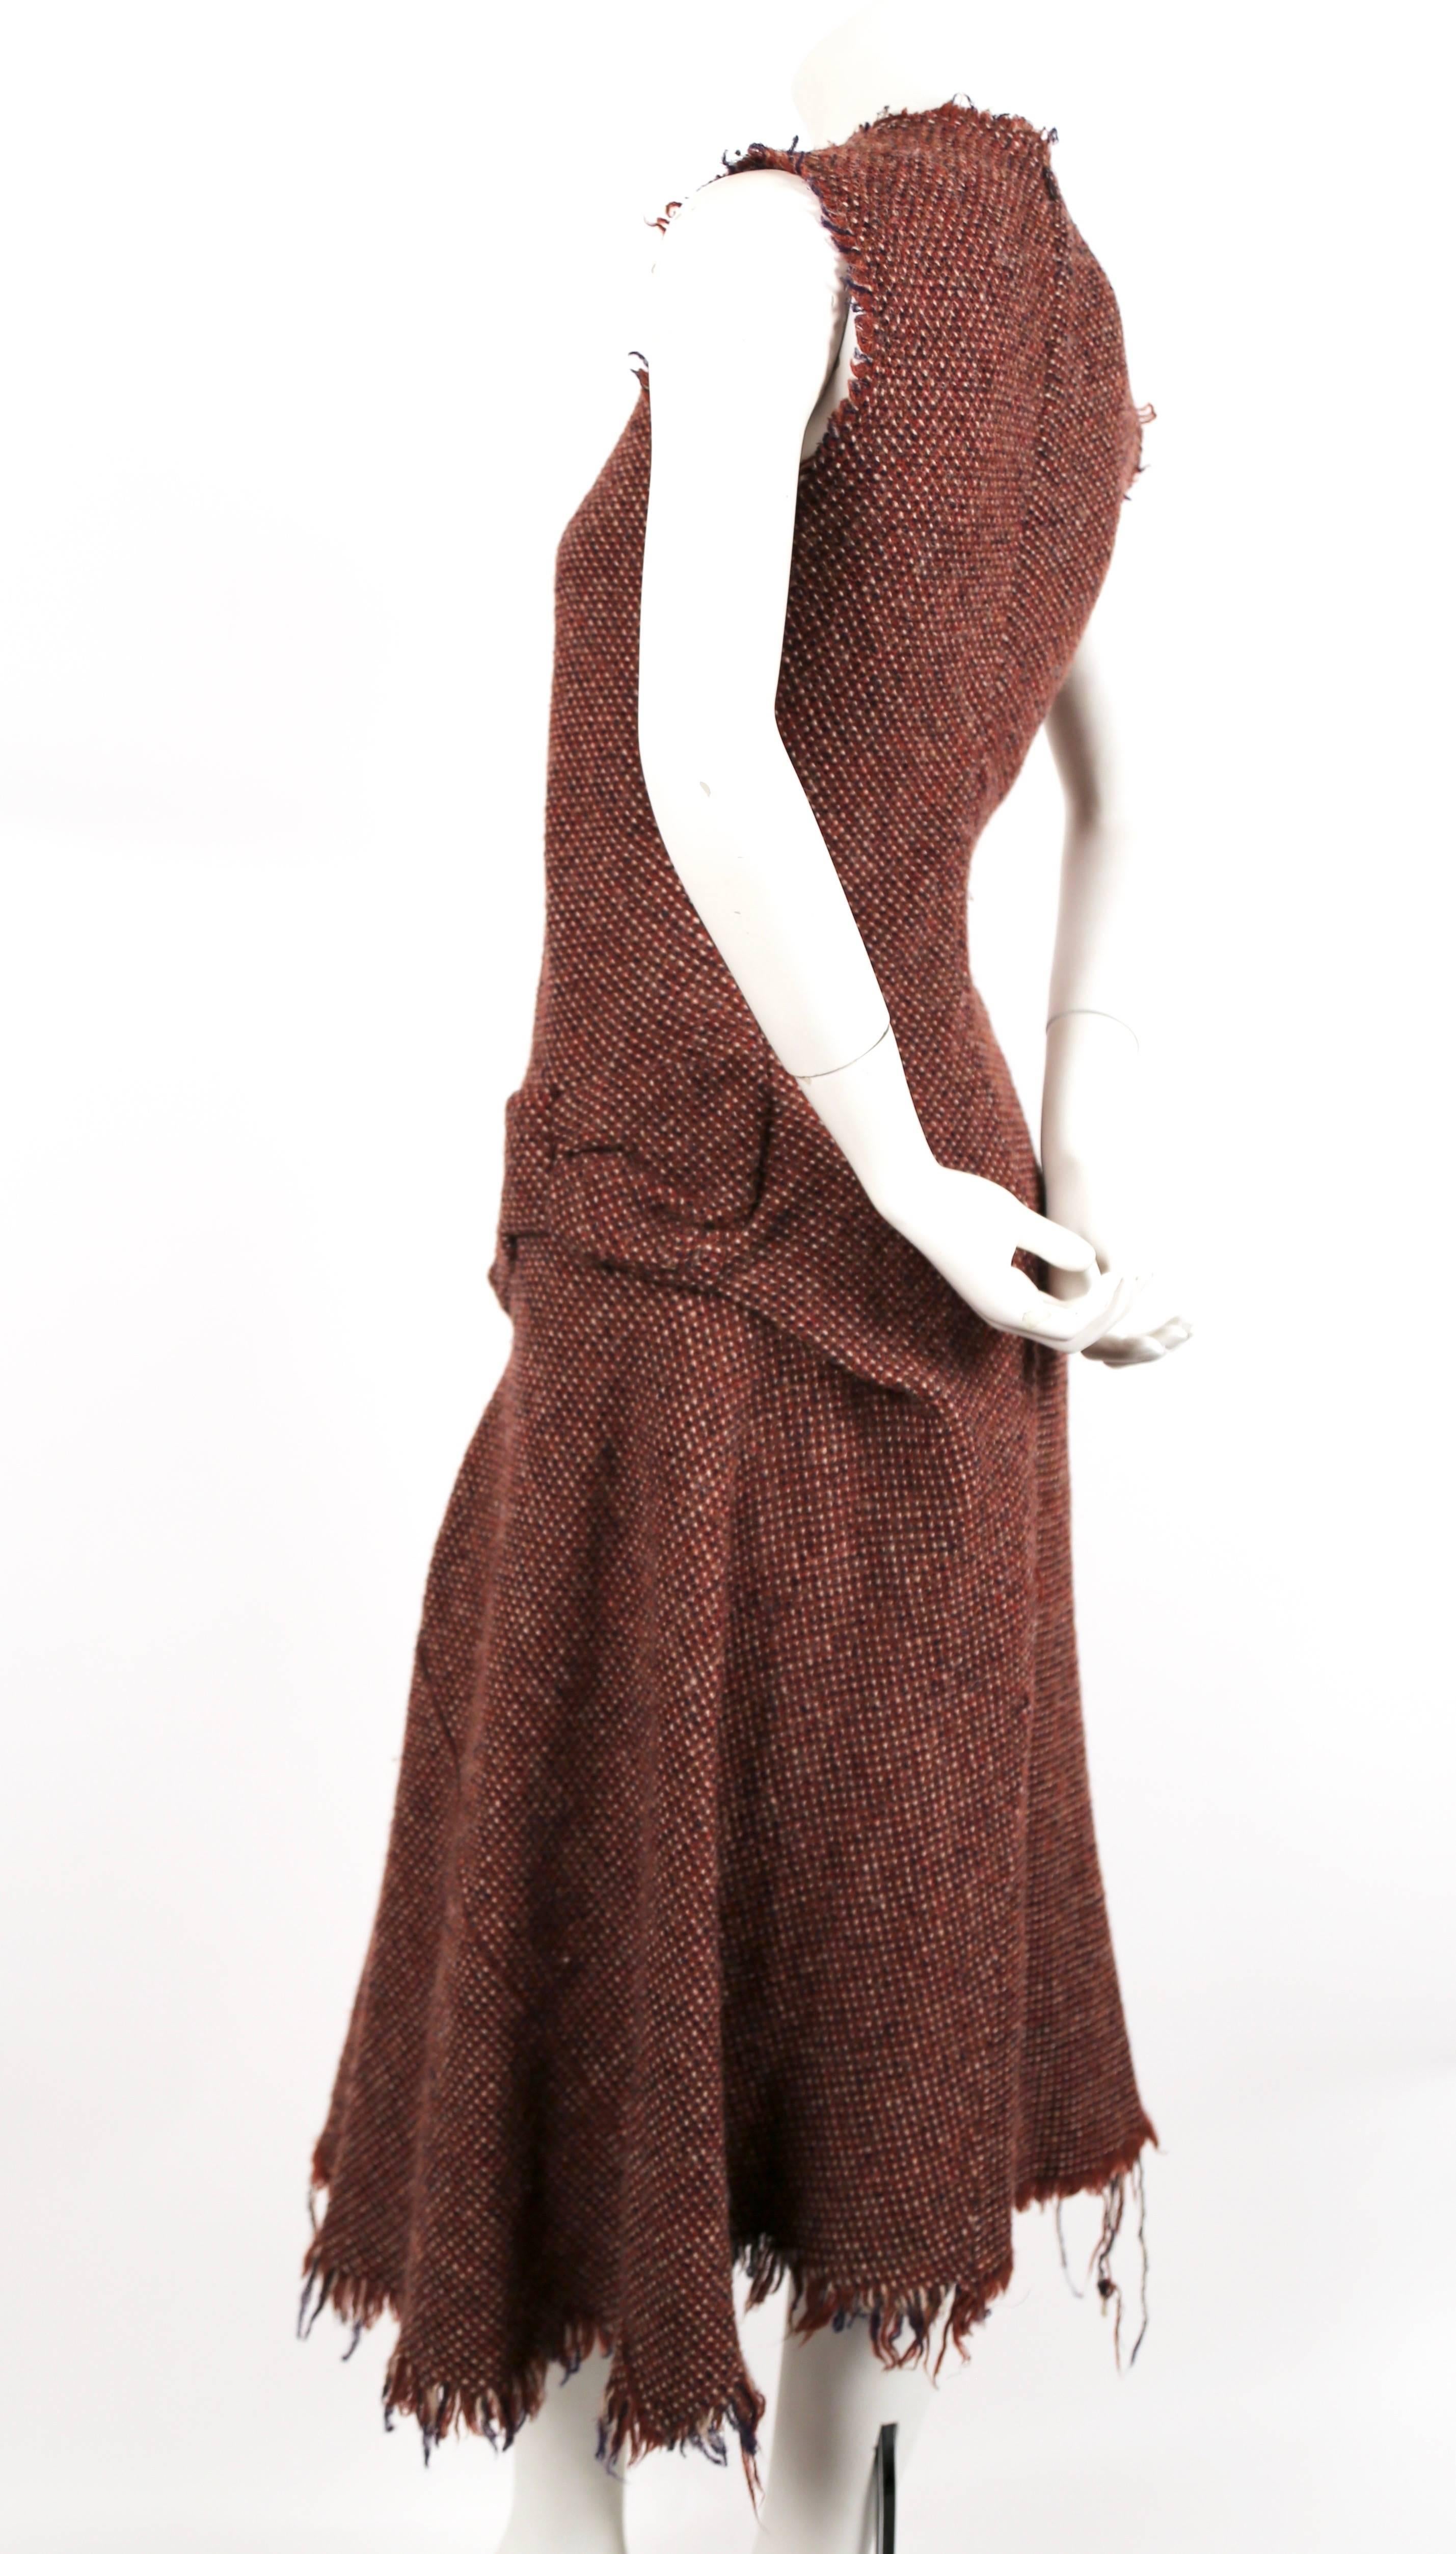 Fuzzy tweed wool dress with uniquely seamed 'bow' at left hip and frayed hemline designed by Junya Watanabe for Comme Des Garcons as seen on the fall 2003 runway. Size 'S'. Approximate measurements: shoulder 14